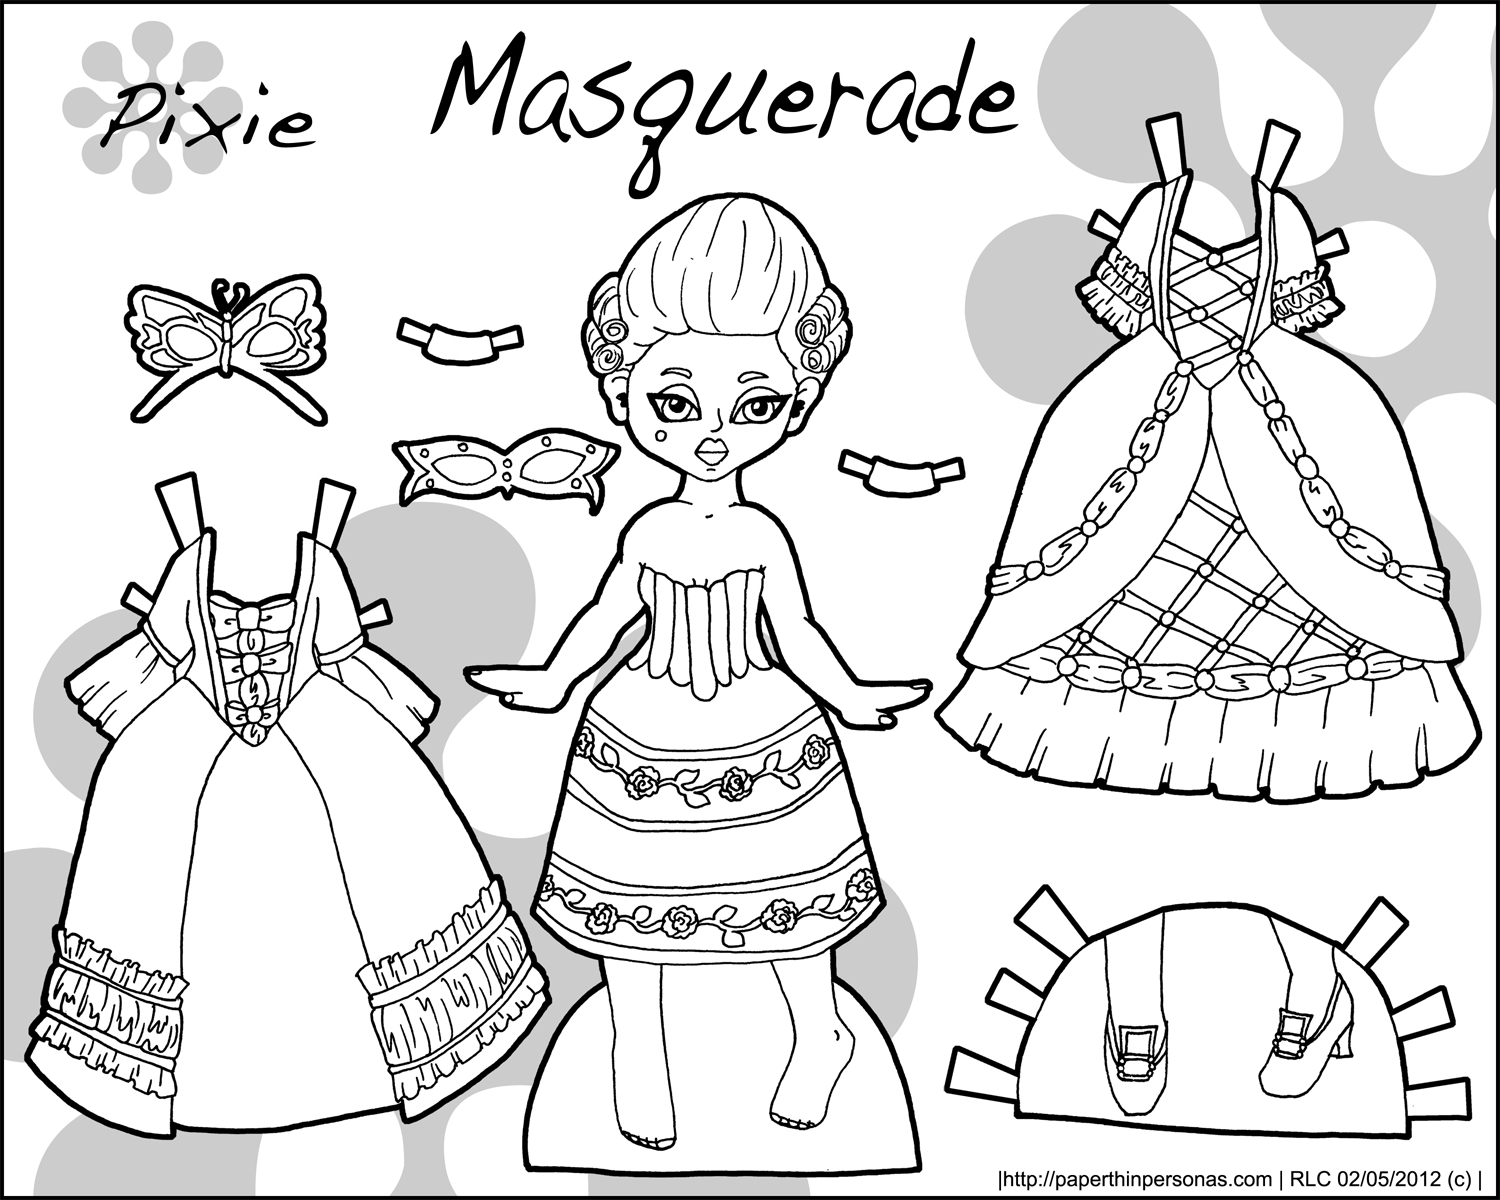 Doll Coloring Pages Printable. Free Printable Stationary Primary New - Printable Paper Dolls To Color Free